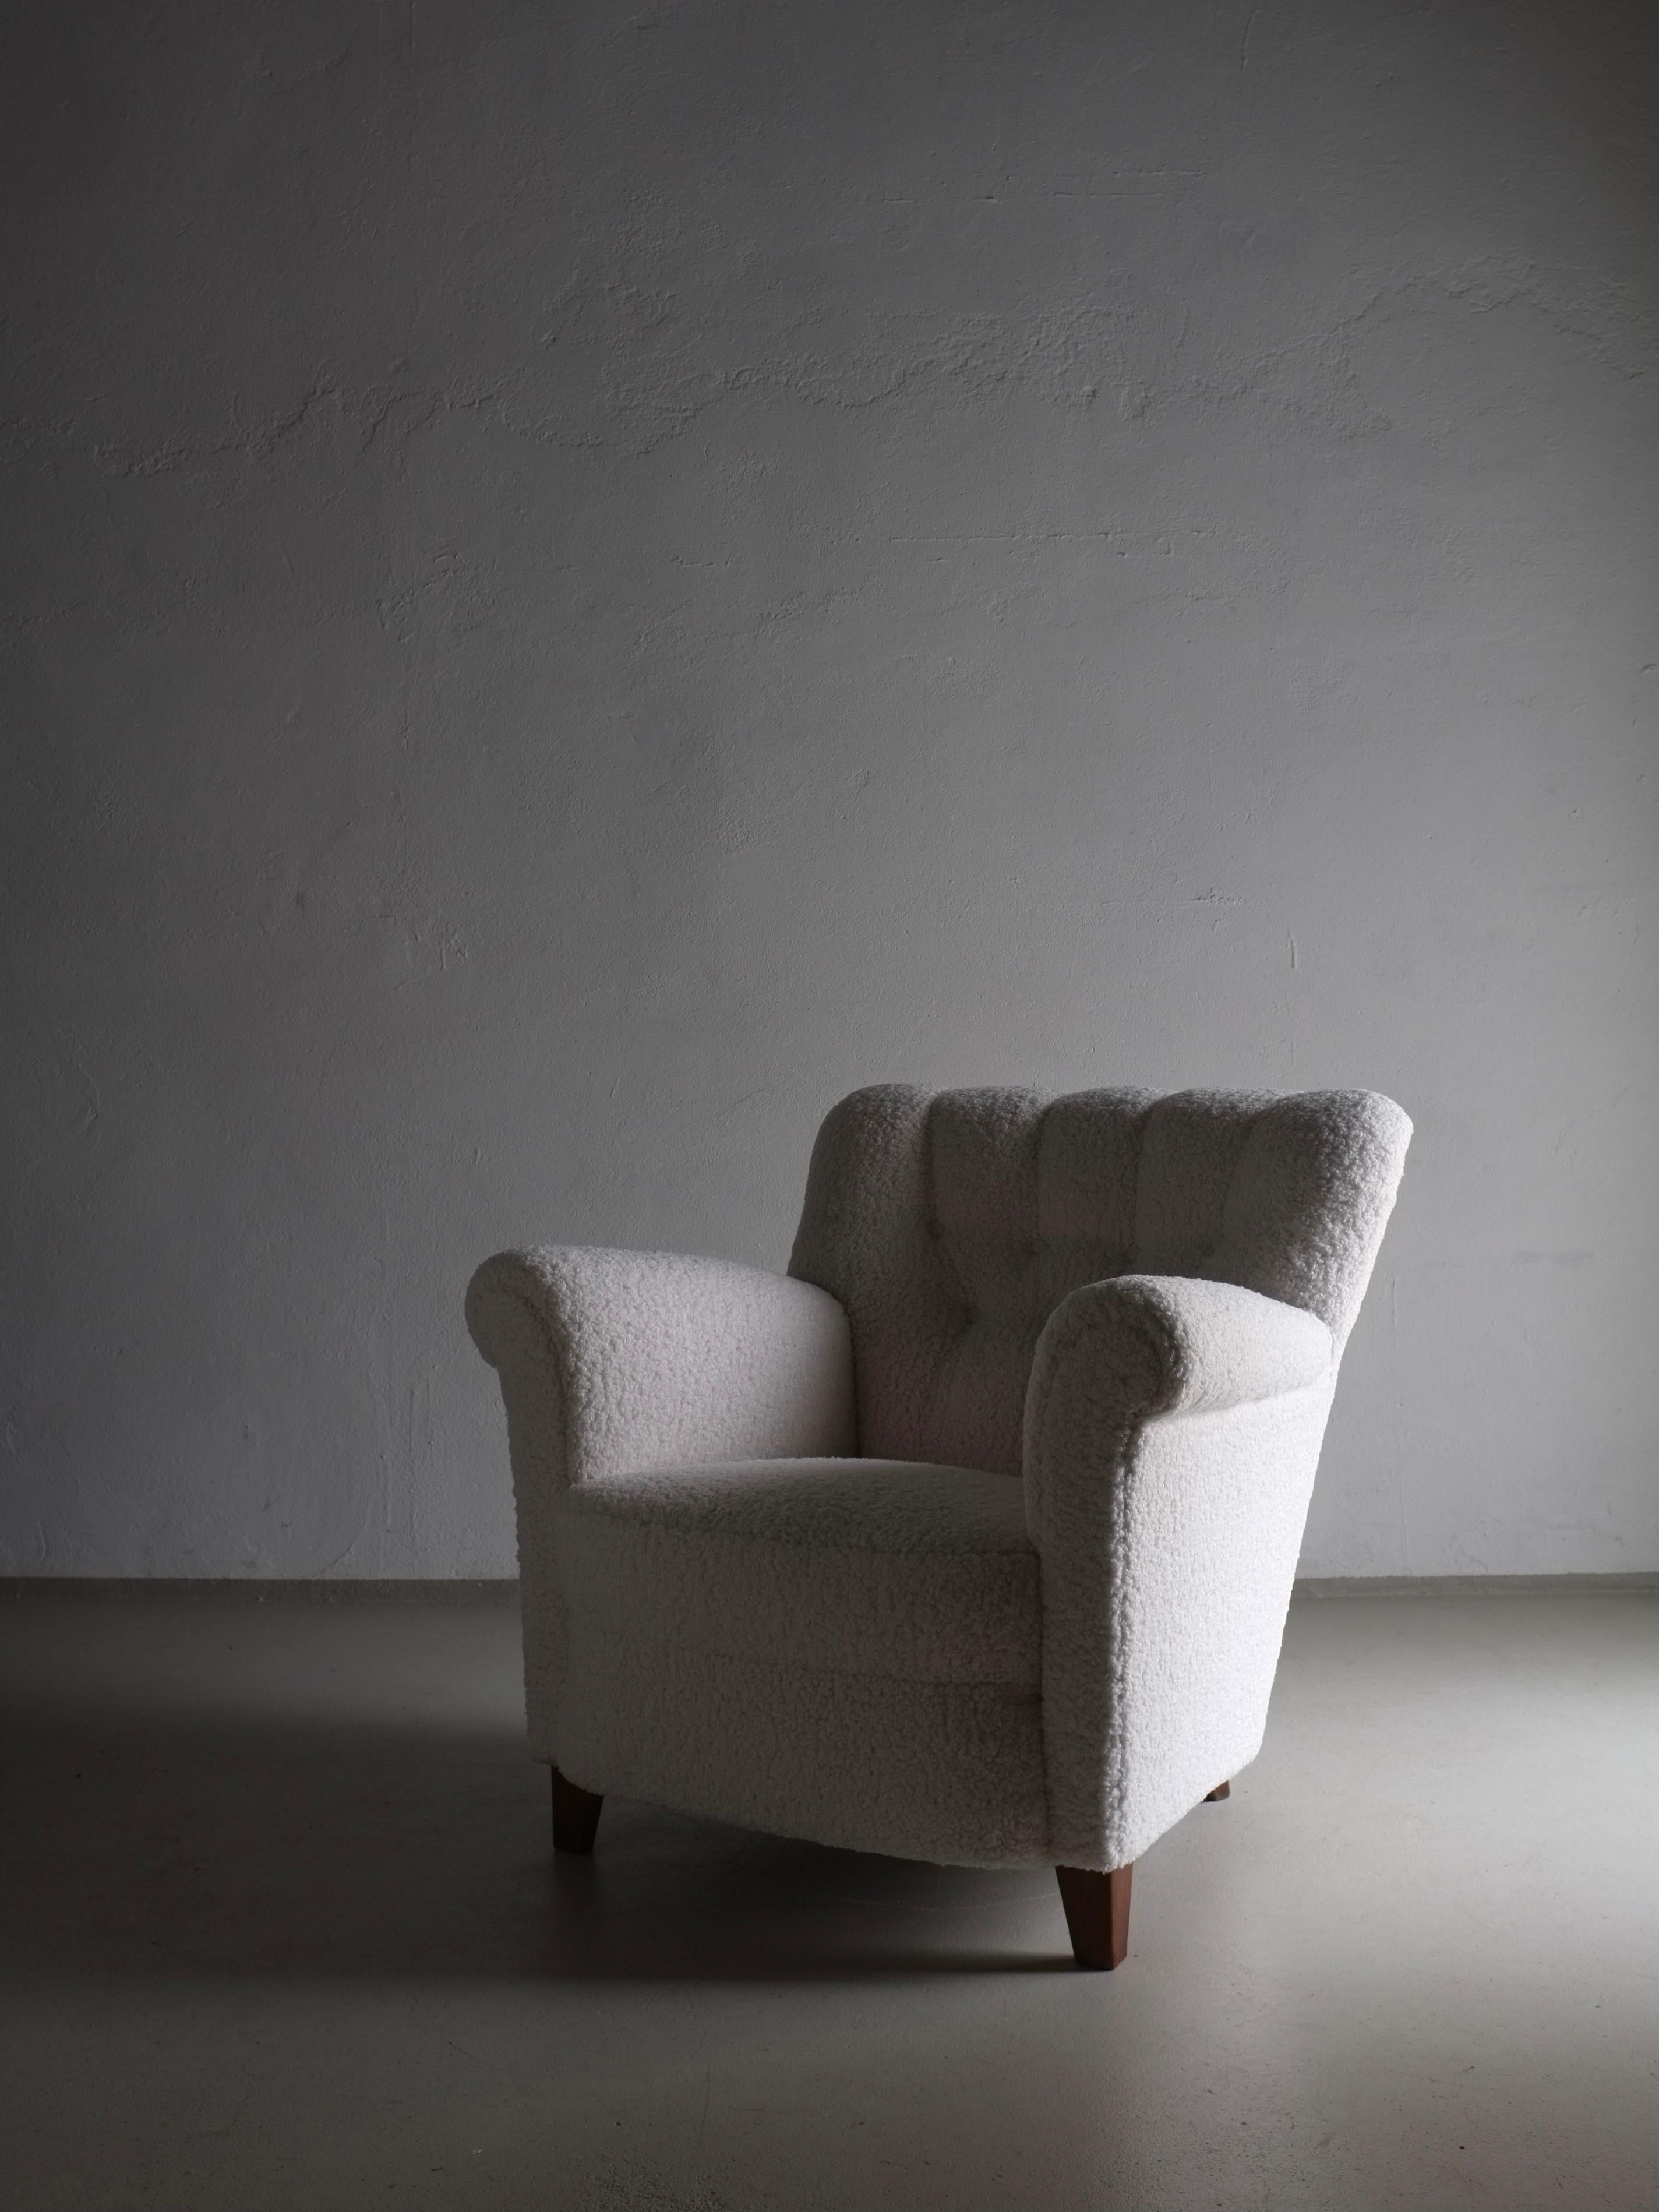 Fabric White Faux Shearling Lounge Chair, Sweden 1940s For Sale